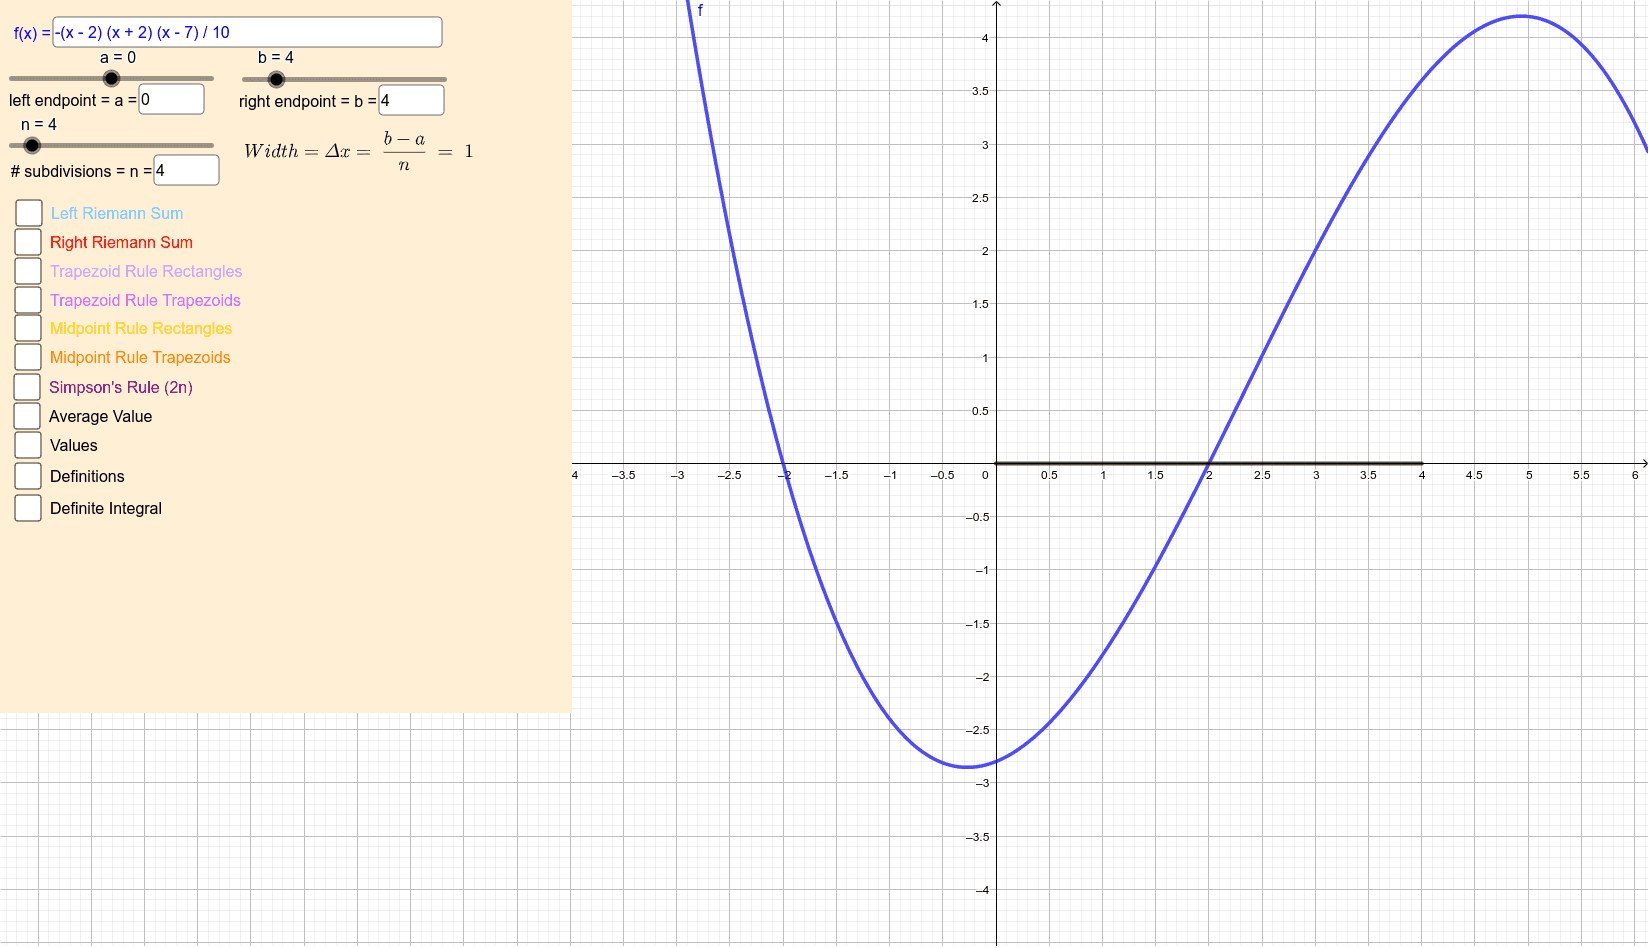 Solved Use the midpoint rule with n=4 to estimate the area